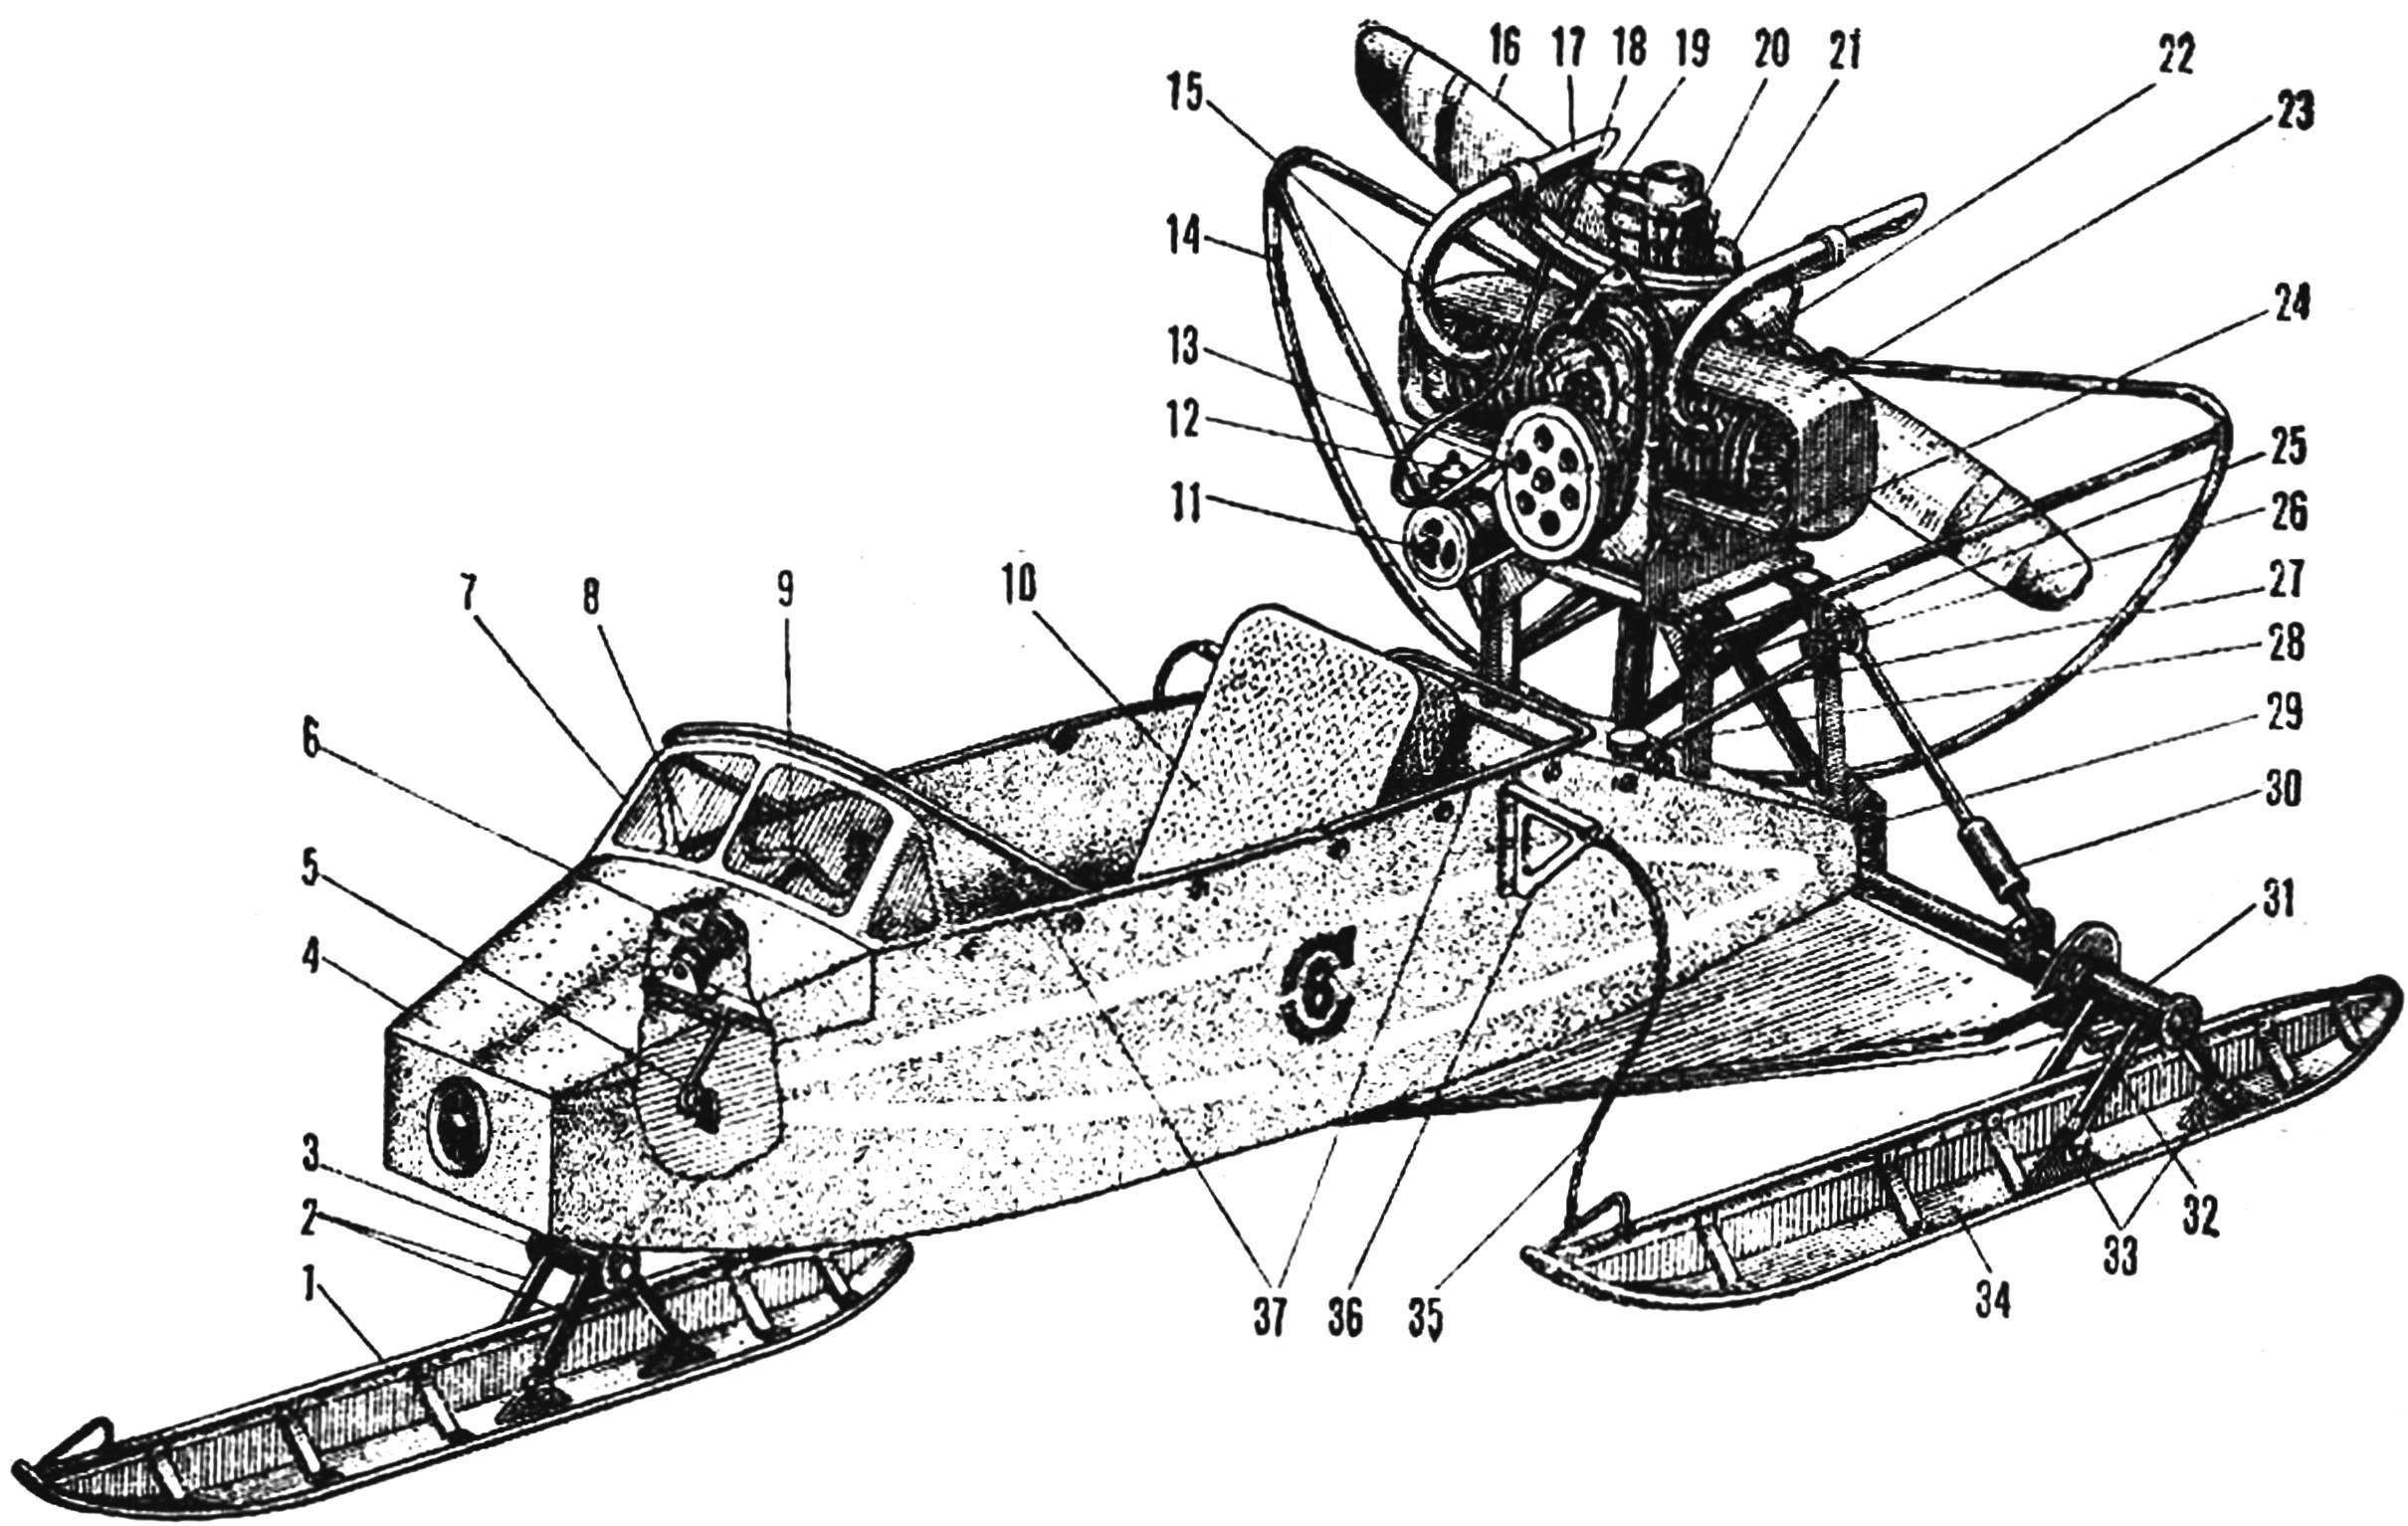 Fig. 1. General view of the snowmobile-6